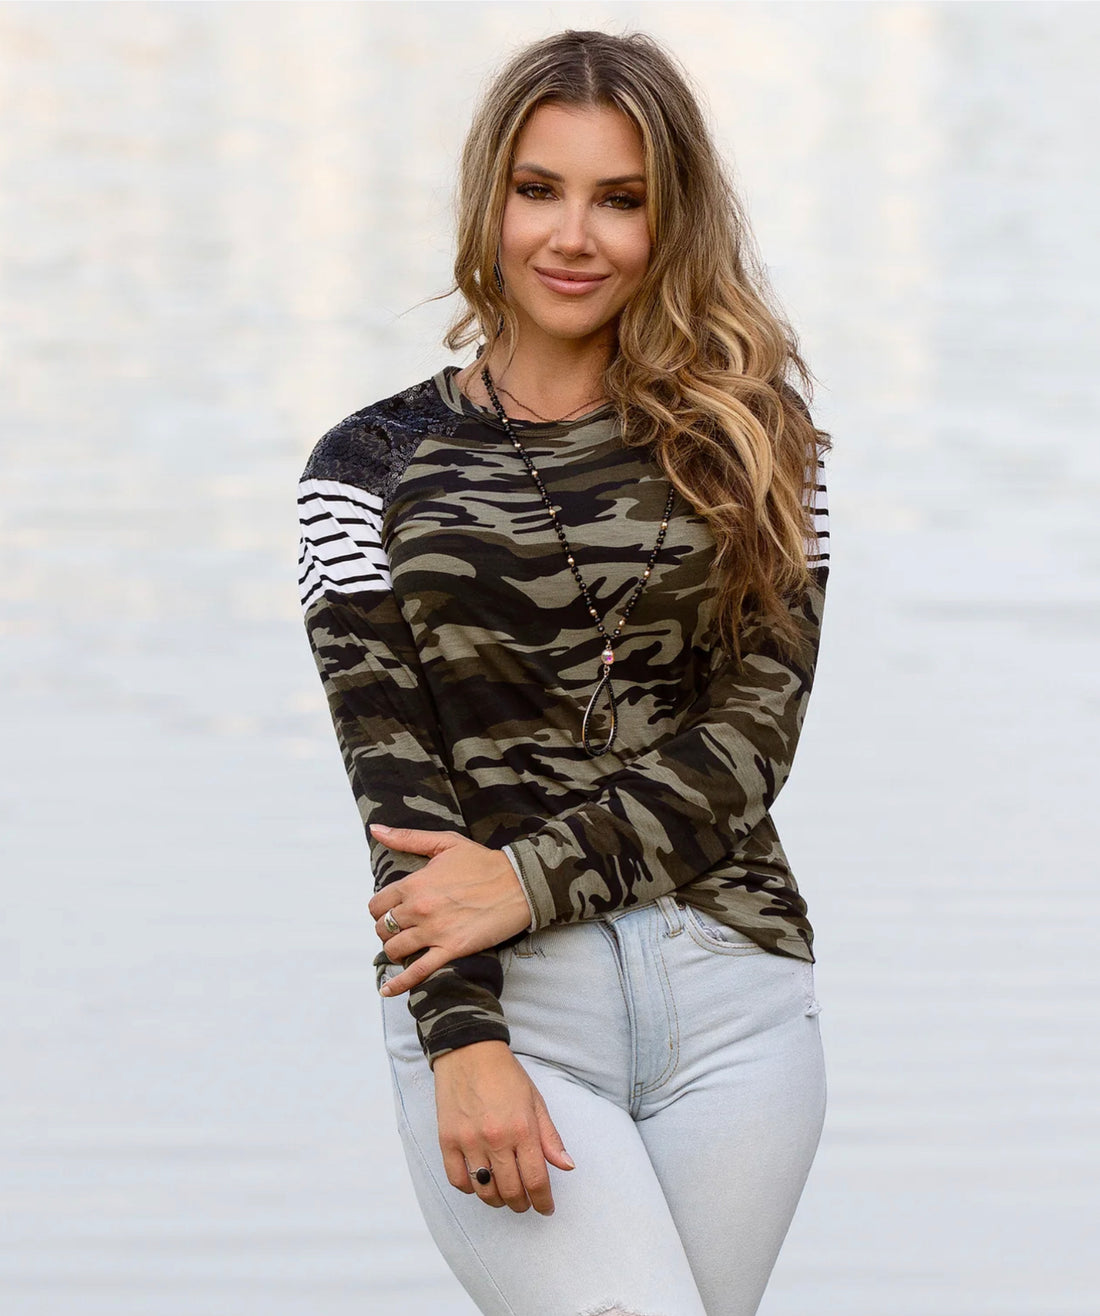 Black and Camouflage Sequin and Stripes Long Sleeve Top